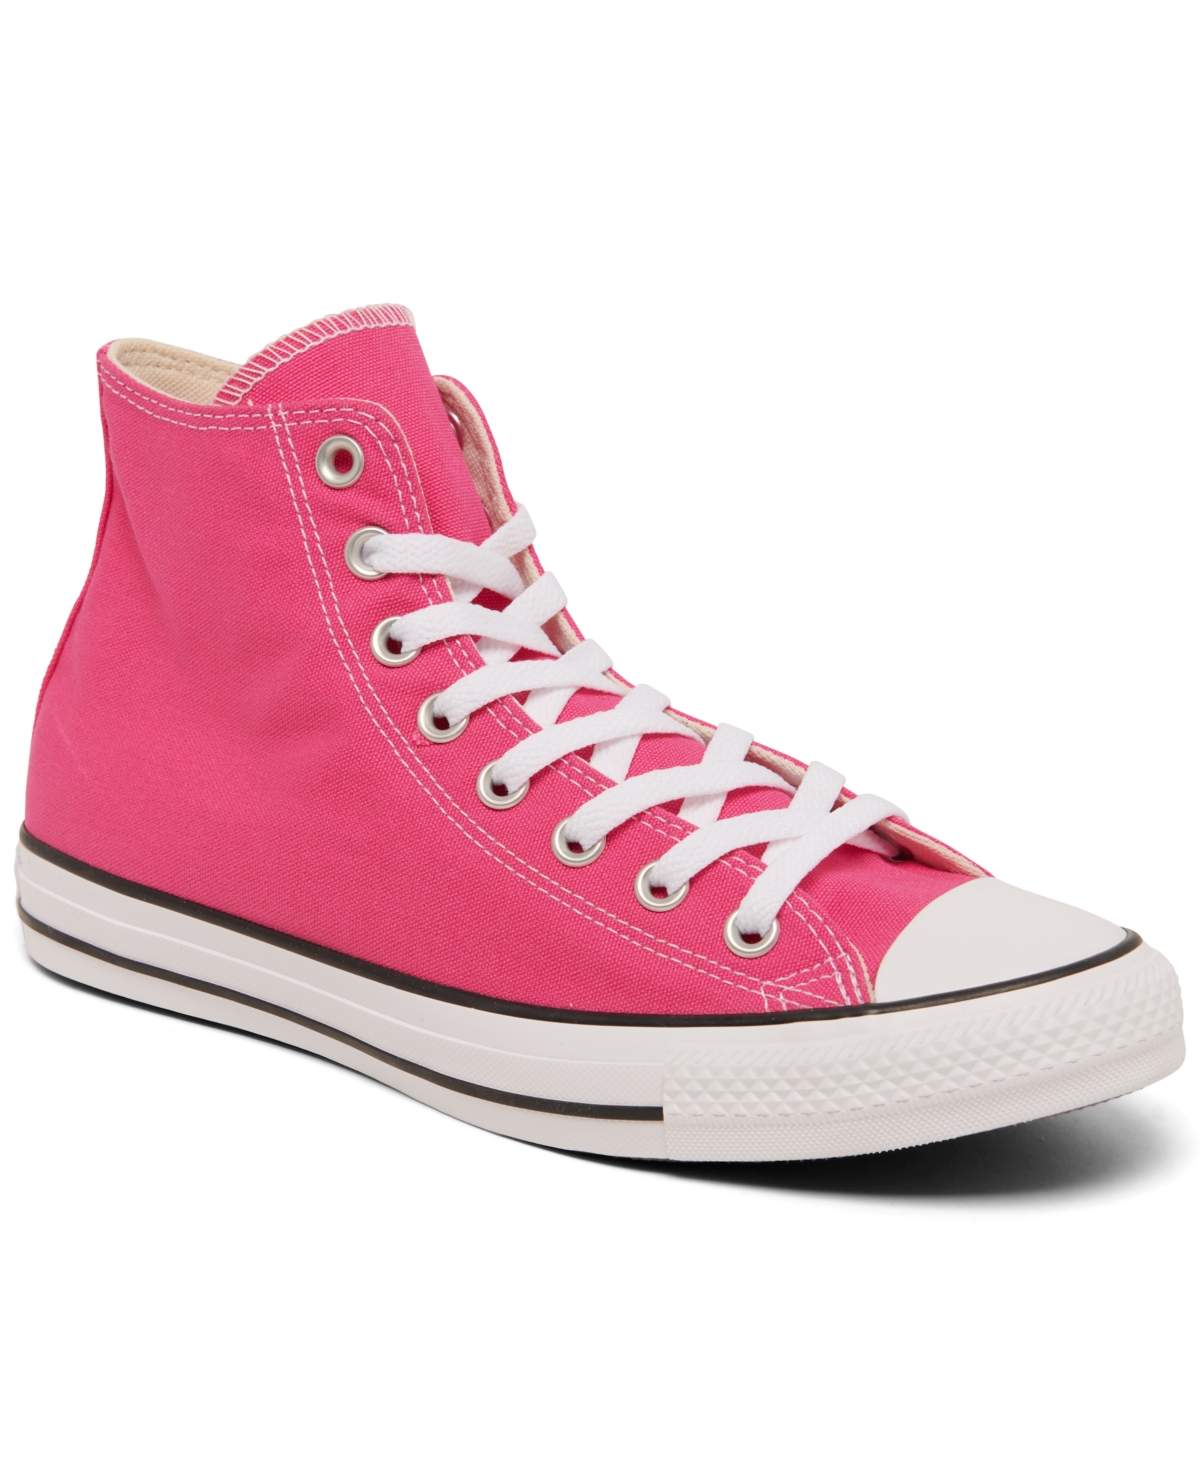 Converse Women's Chuck Taylor High Top Casual Sneakers From Finish Line In Chaos Fuchsia